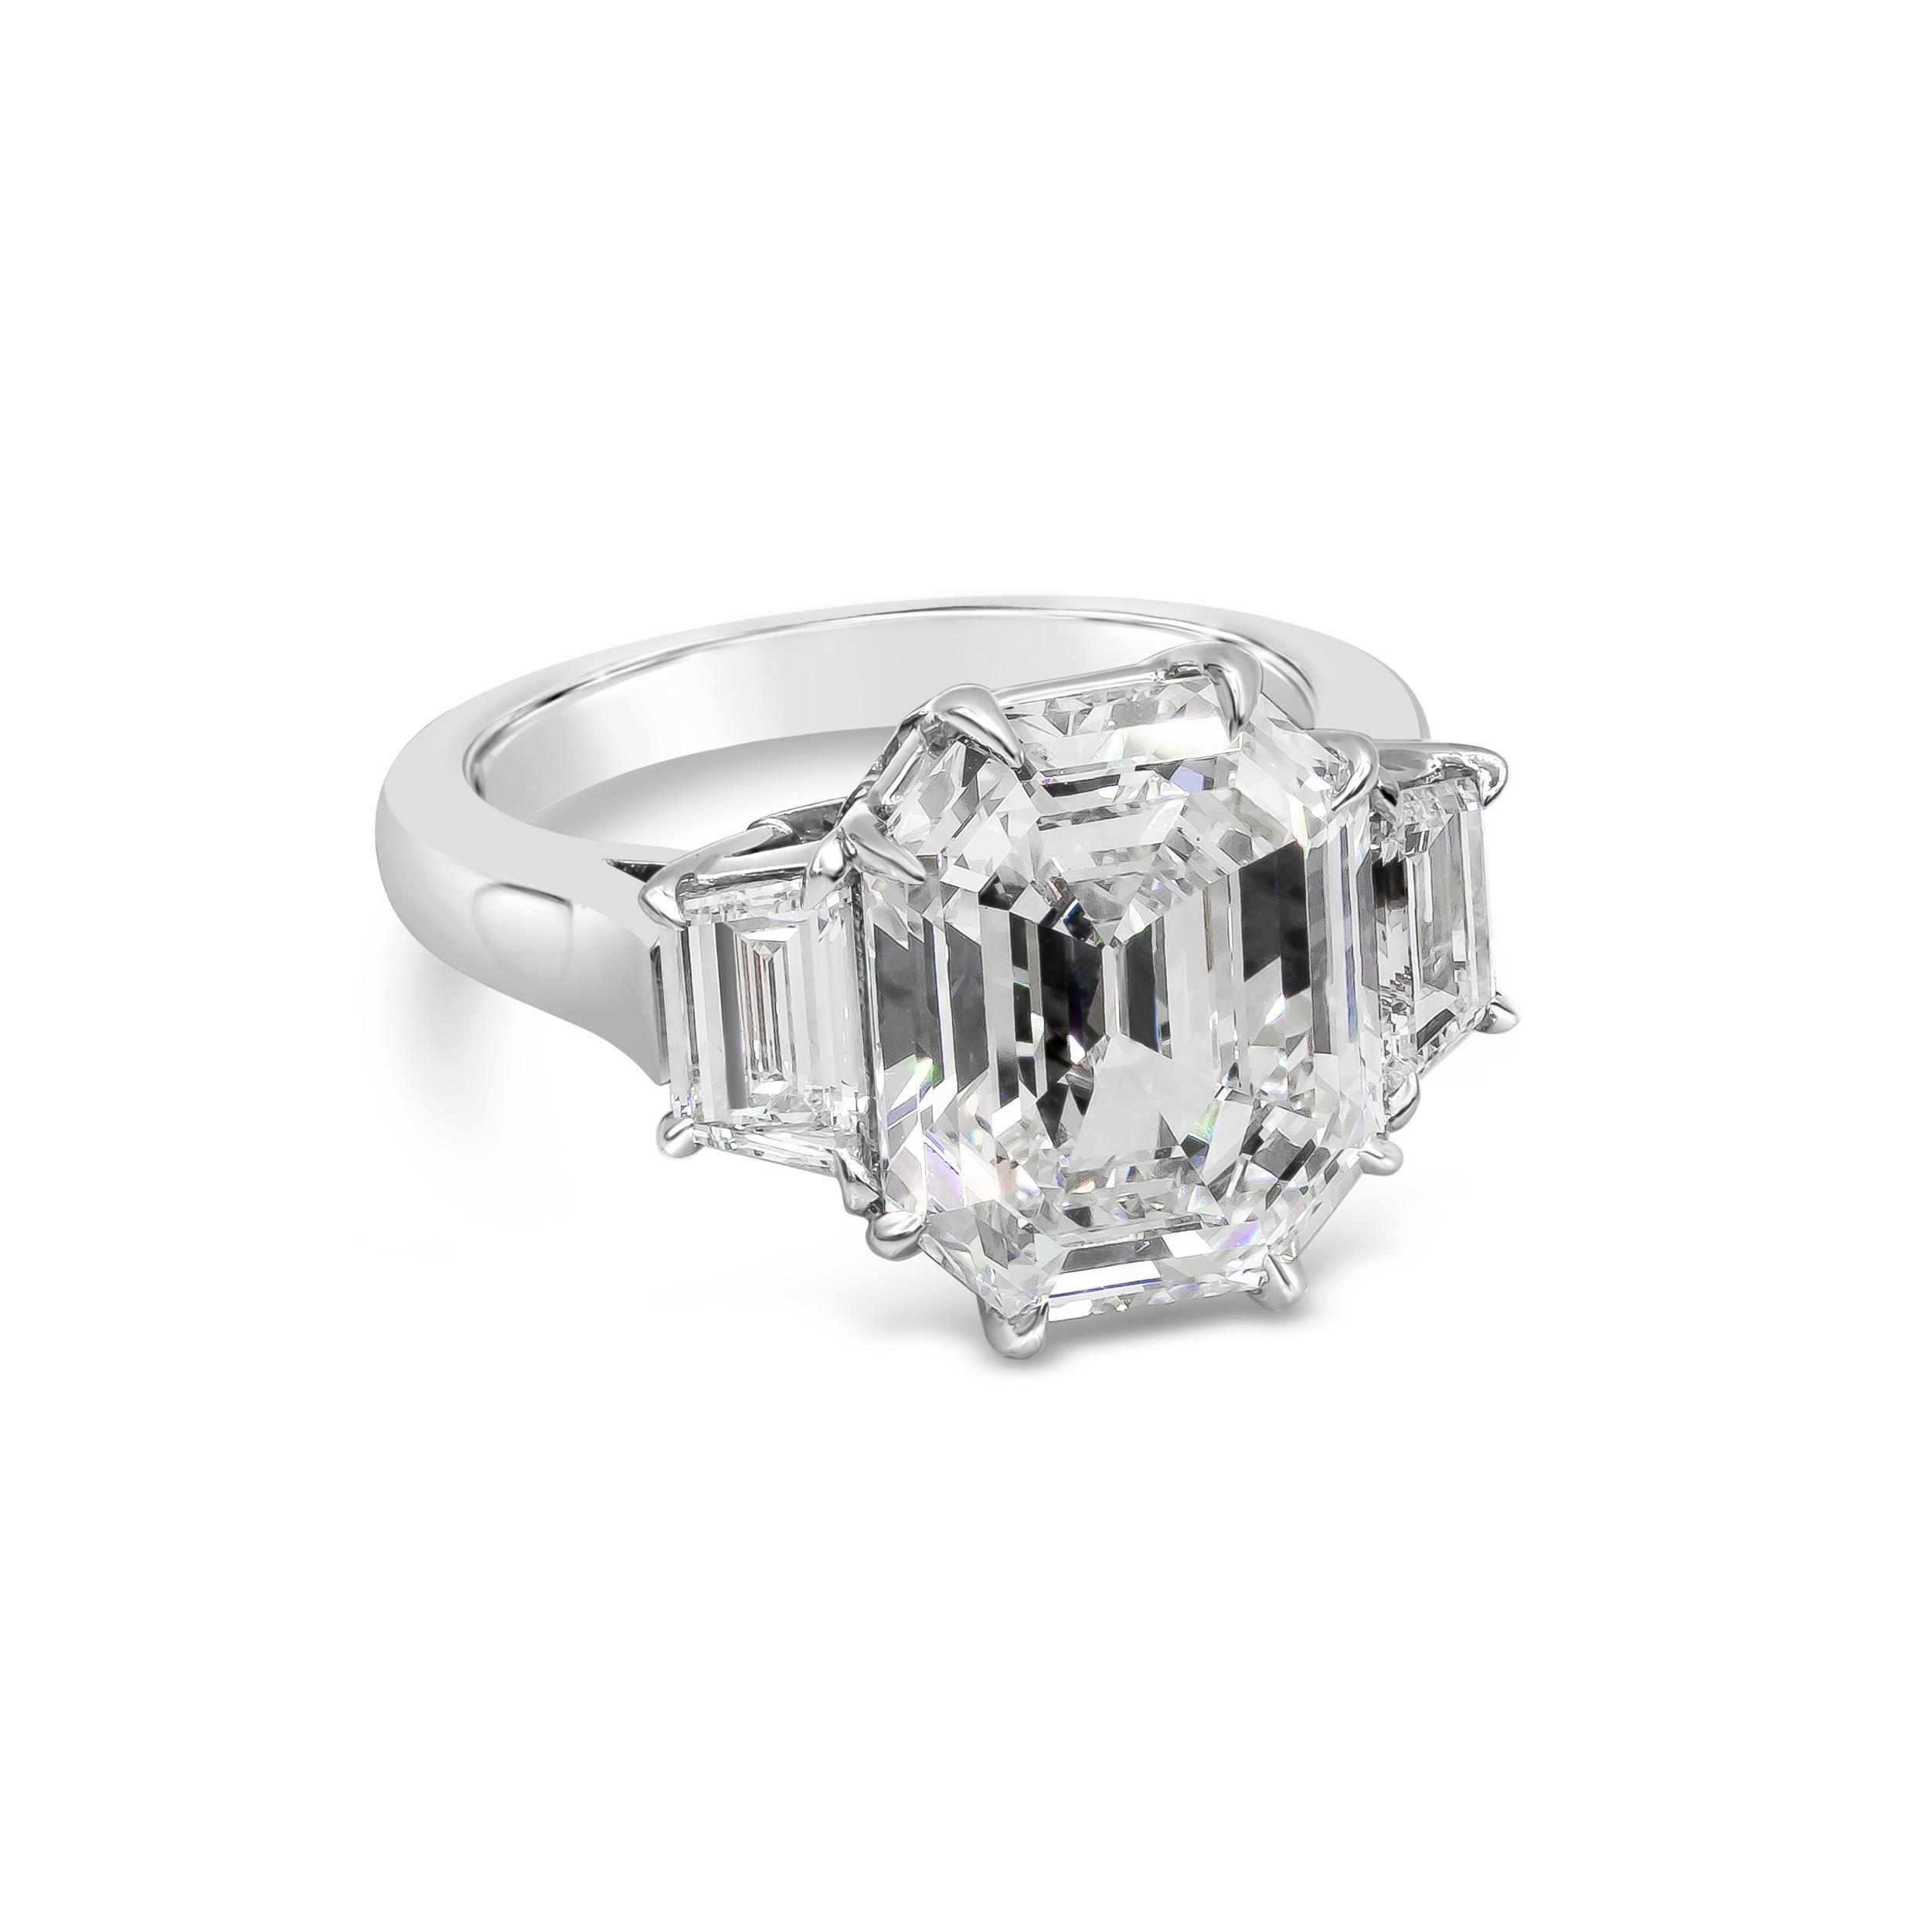 An elegant and unique GIA certified octagon shaped step cut diamond weighing 6.08 carat set in an eight prong and flanked by two trapezoid diamonds in a polished platinum basket. Center stone is I color and VS2 in clarity. Size 6 US and resizable